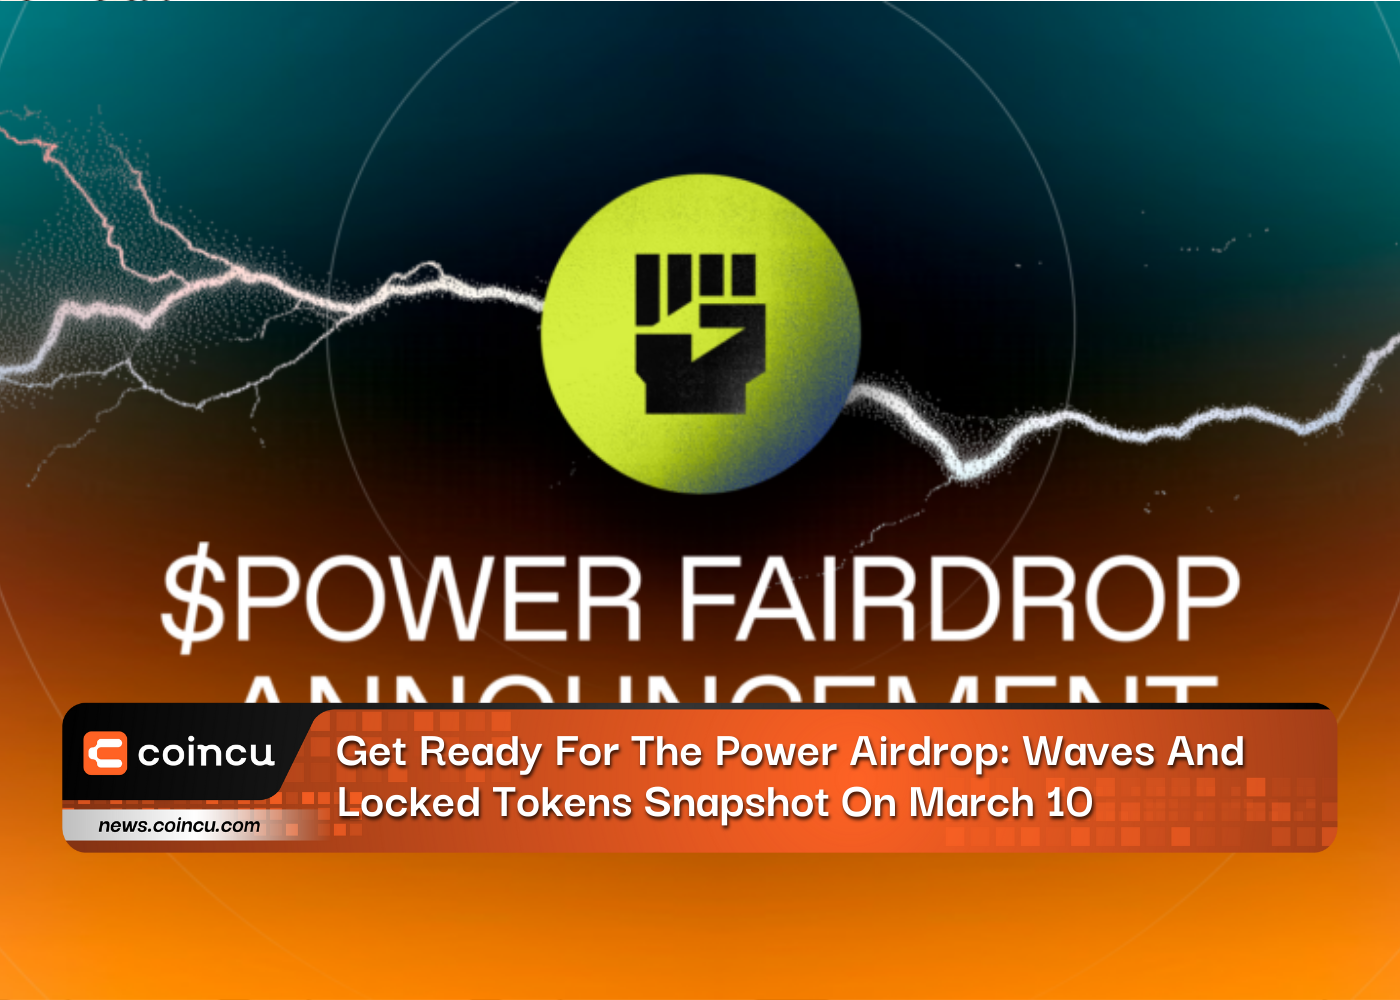 Get Ready For The Power Airdrop: Waves And Locked Tokens Snapshot On March 10